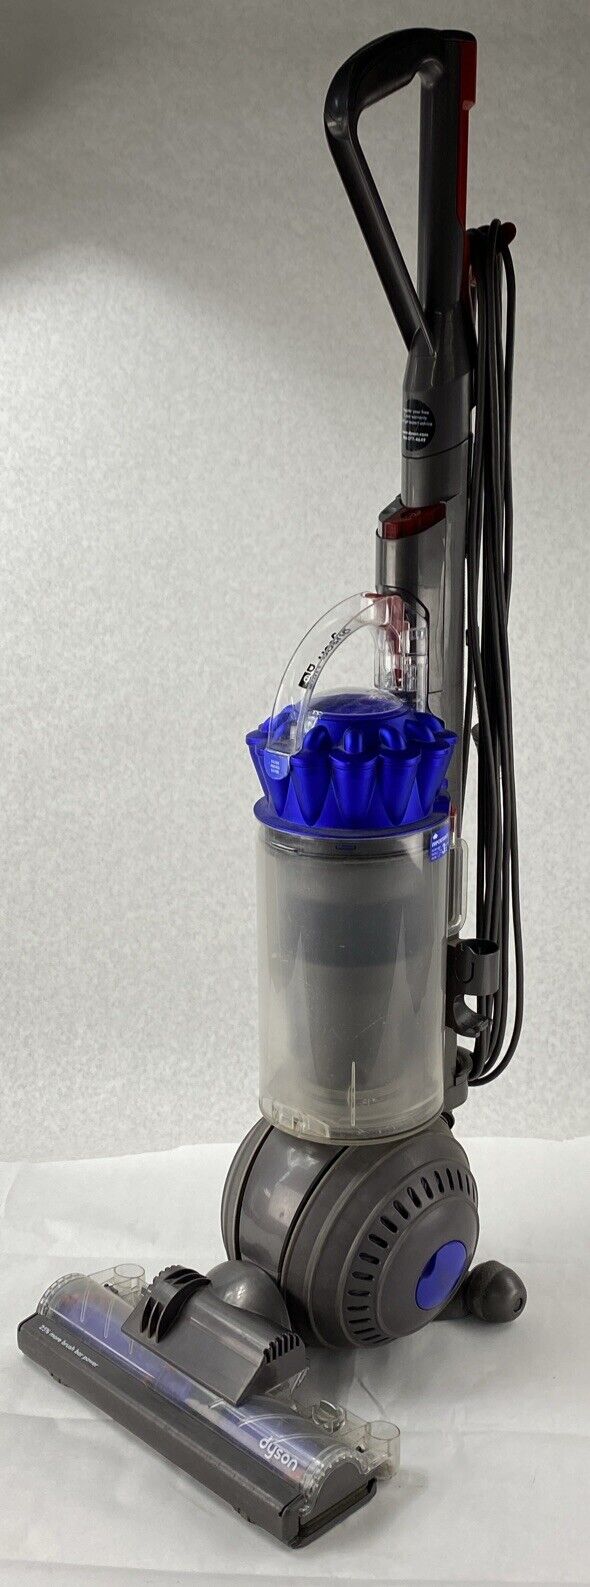 Dyson DC65 Upright Bagless Vacuum Cleaner FOR PARTS UNRESPONSIVE FLOOR BRUSH